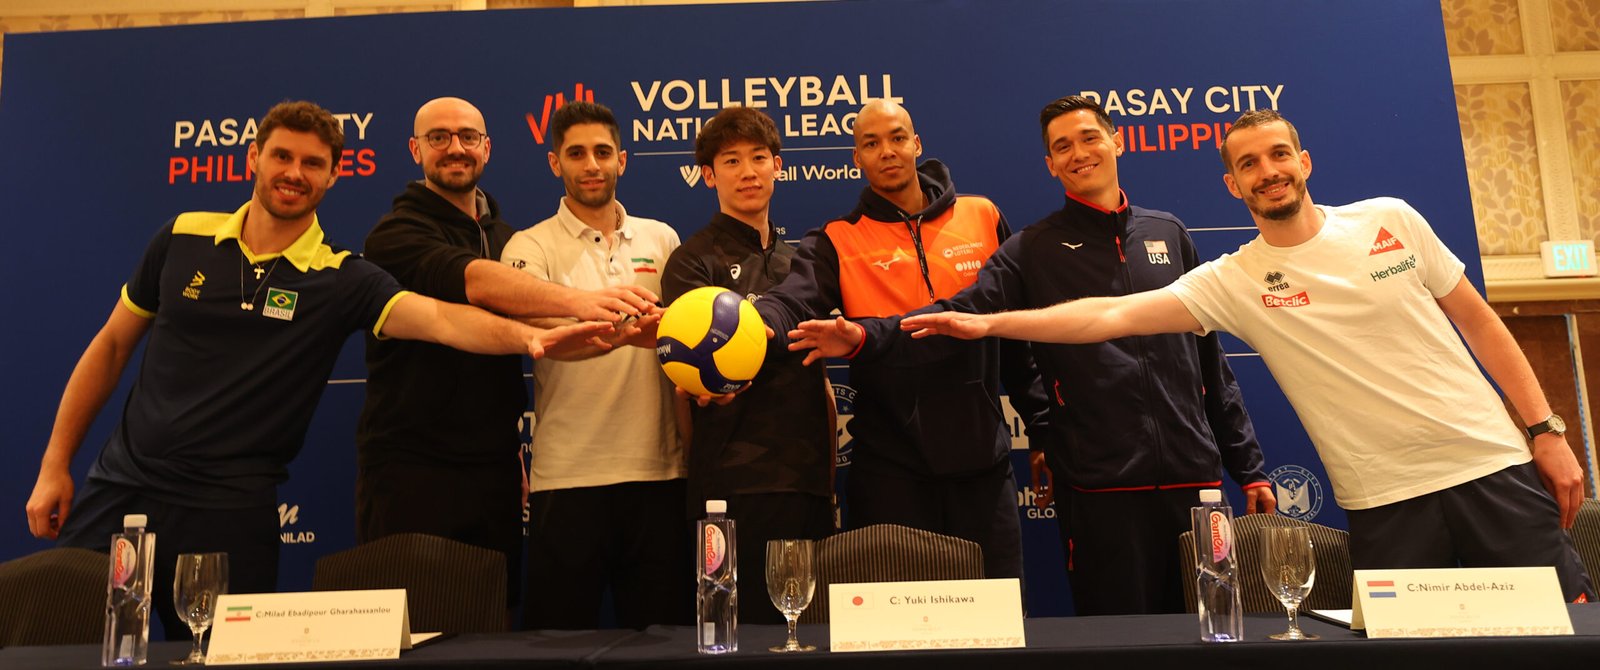 ‘Great expectations’ ahead for Japan in VNL Manila leg